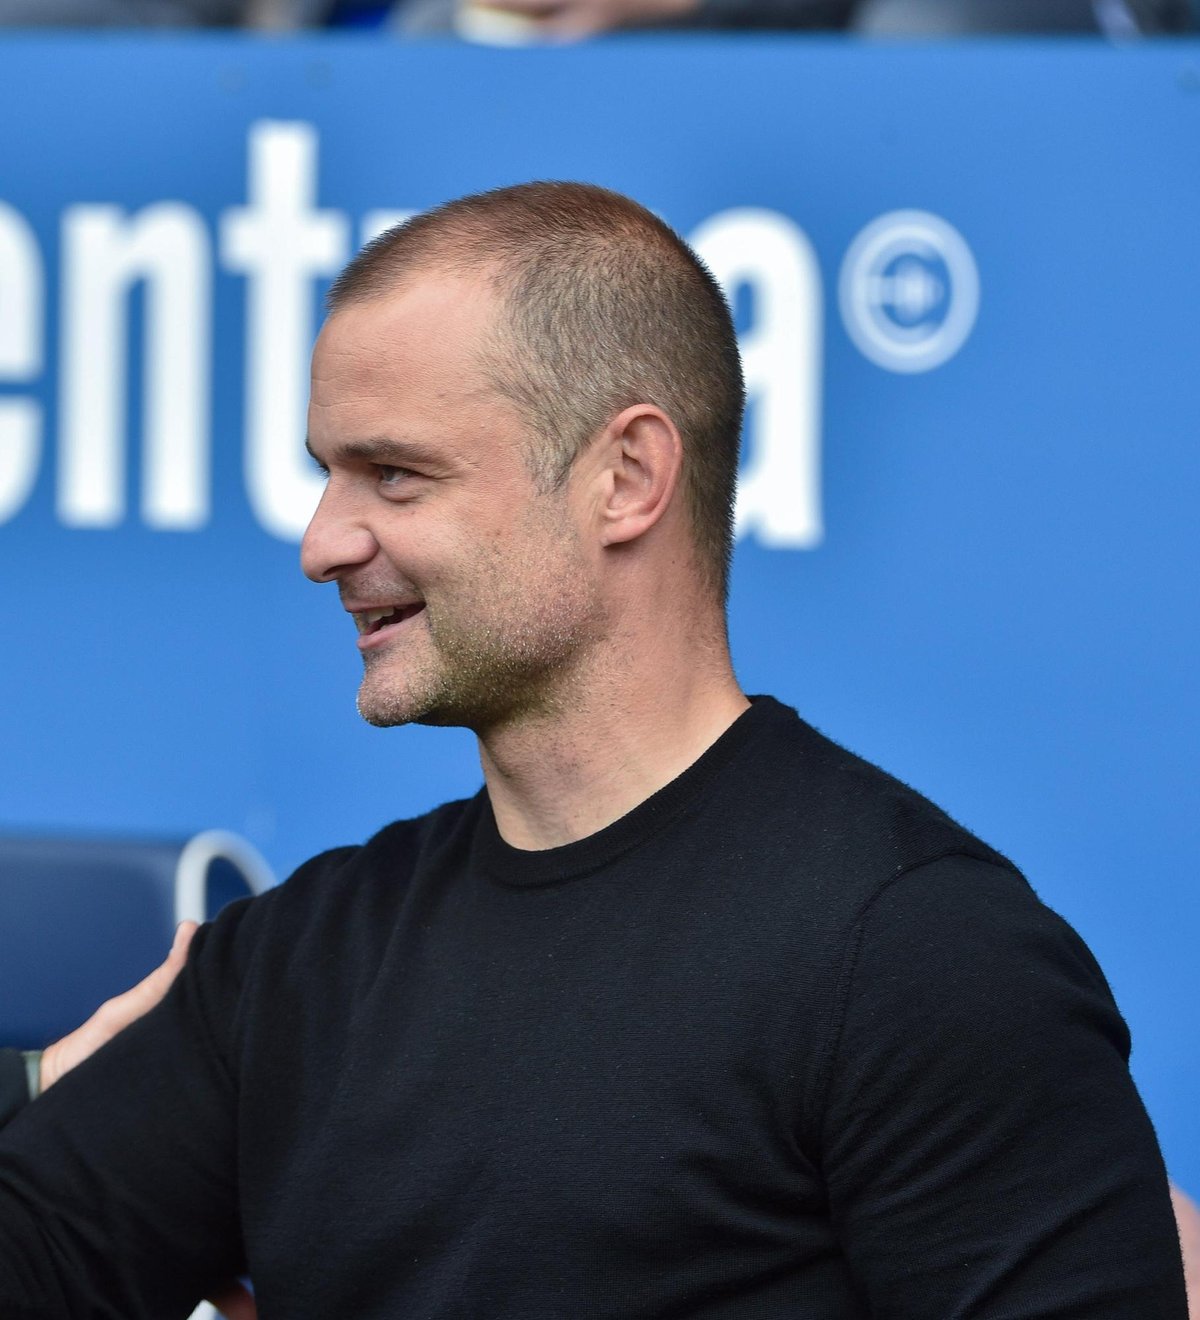 Wigan Athletic: Shaun Maloney provides injury update ahead of Saturday's game against Barnsley